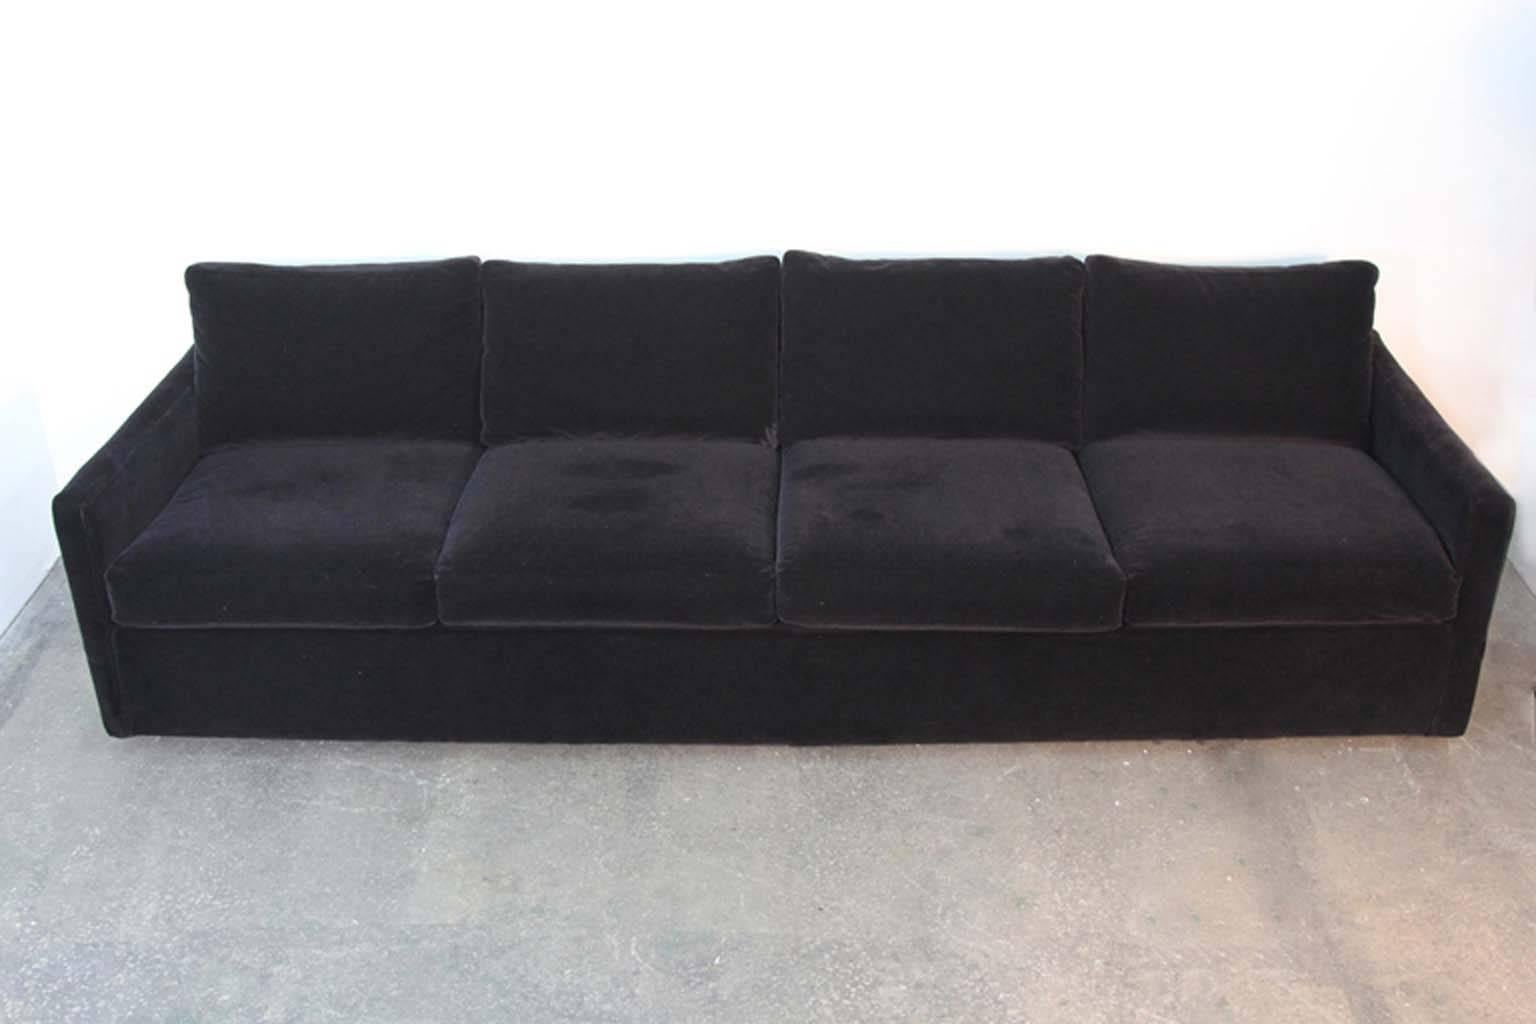 Amazing Knoll mohair upholstery on this very long four seat Mid-Century modern sofa. Clean sleek style, amazing upholstery, extra long.